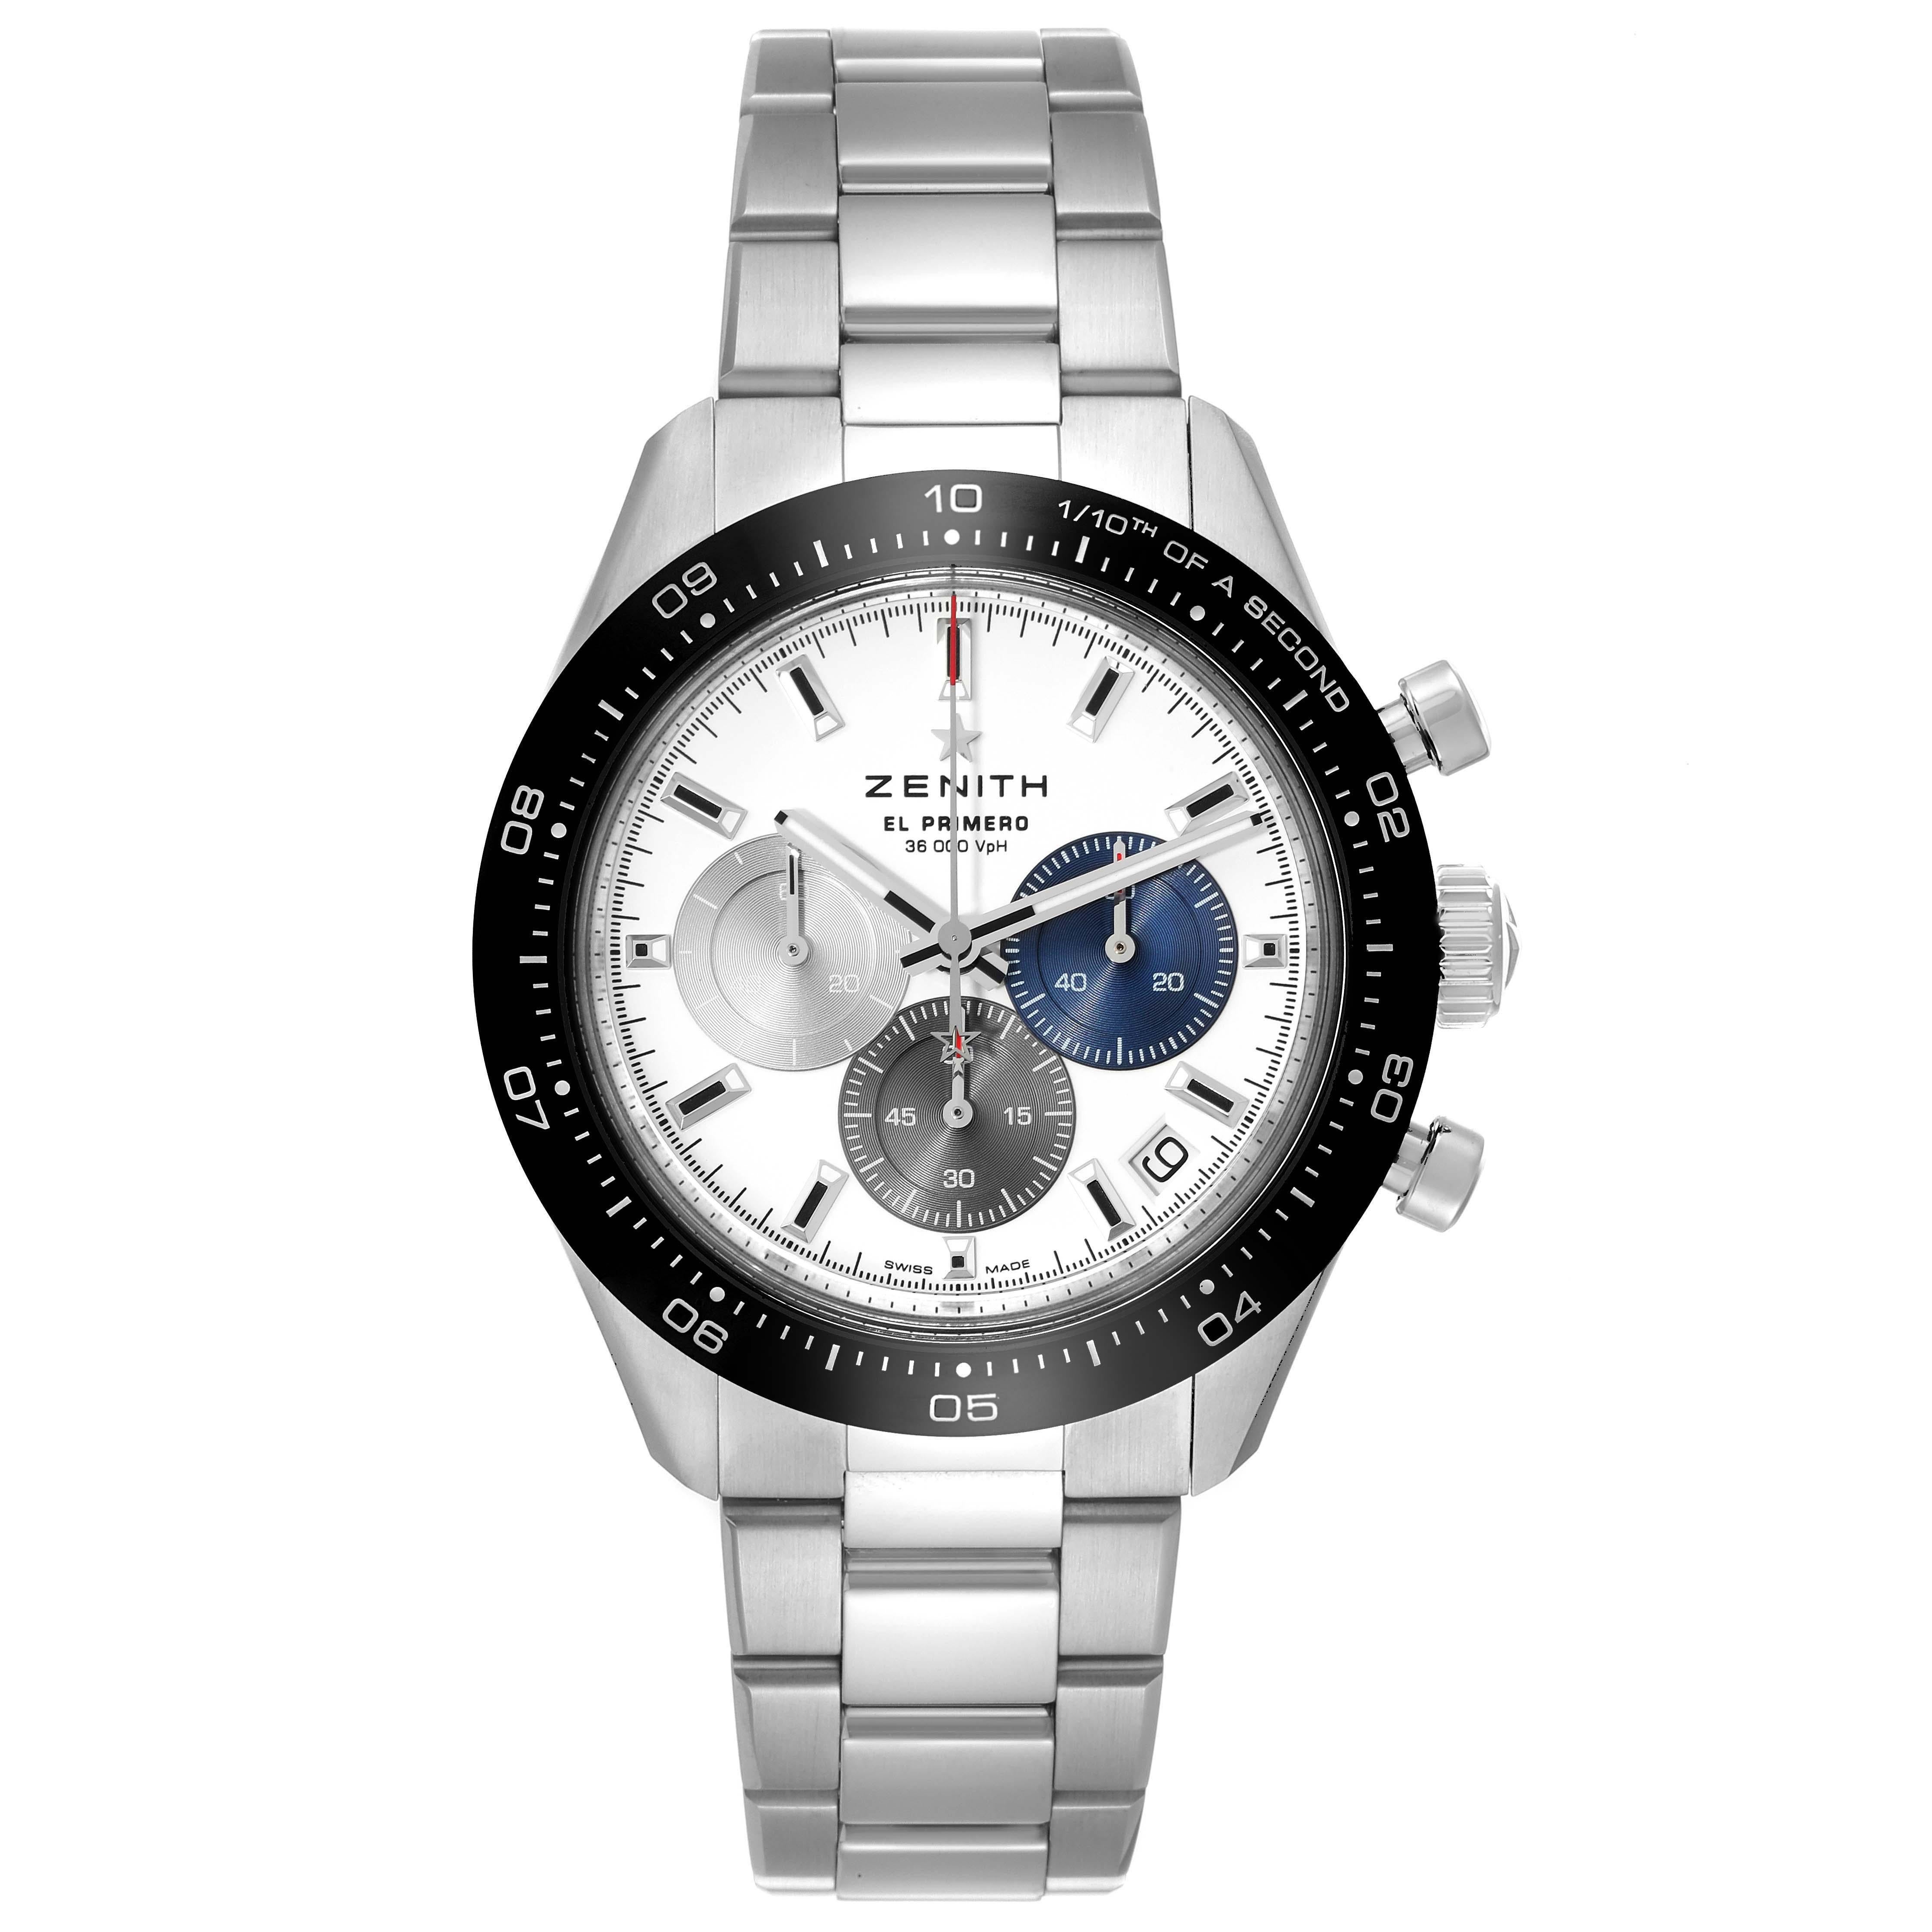 Zenith Chronomaster Sport 41mm Steel Mens Watch 03.3100.3600 Box Card. In house Zenith El Primero self-winding automatic 1/10th of a second Chronograph movement . Stainless steel case 41.0 mm in diameter. Chronograph pushers at 2 and 4 o'clock.